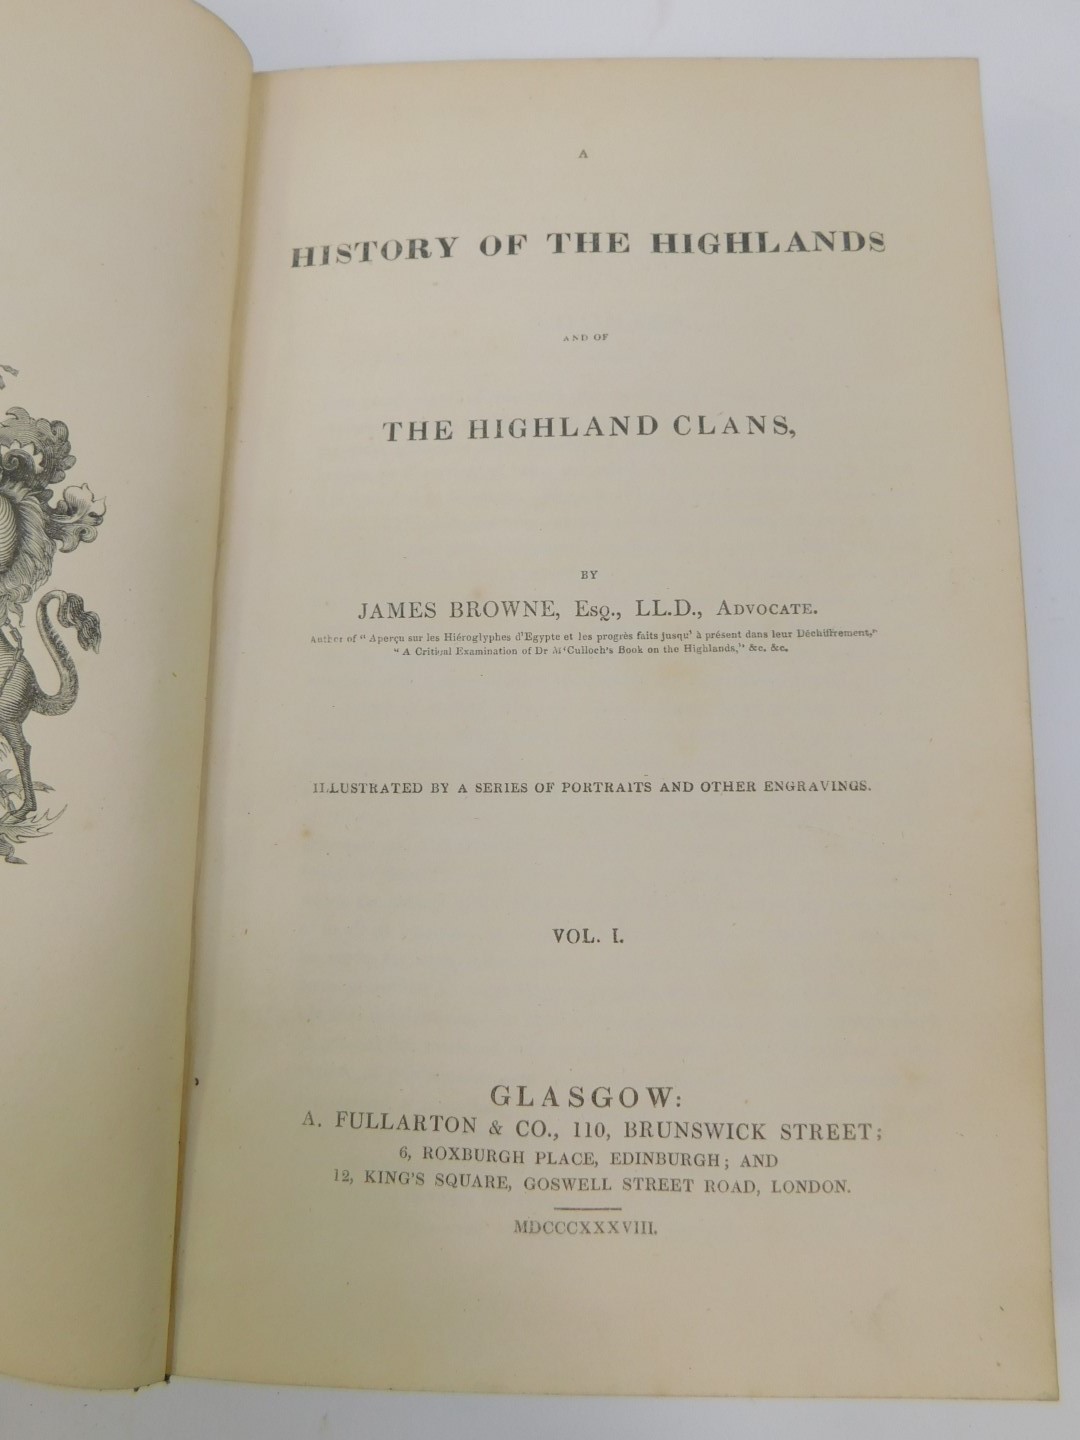 Browne (James). A History of the Highlands and of the Highland Clans, first edition, 4 vols, calf, - Image 2 of 3